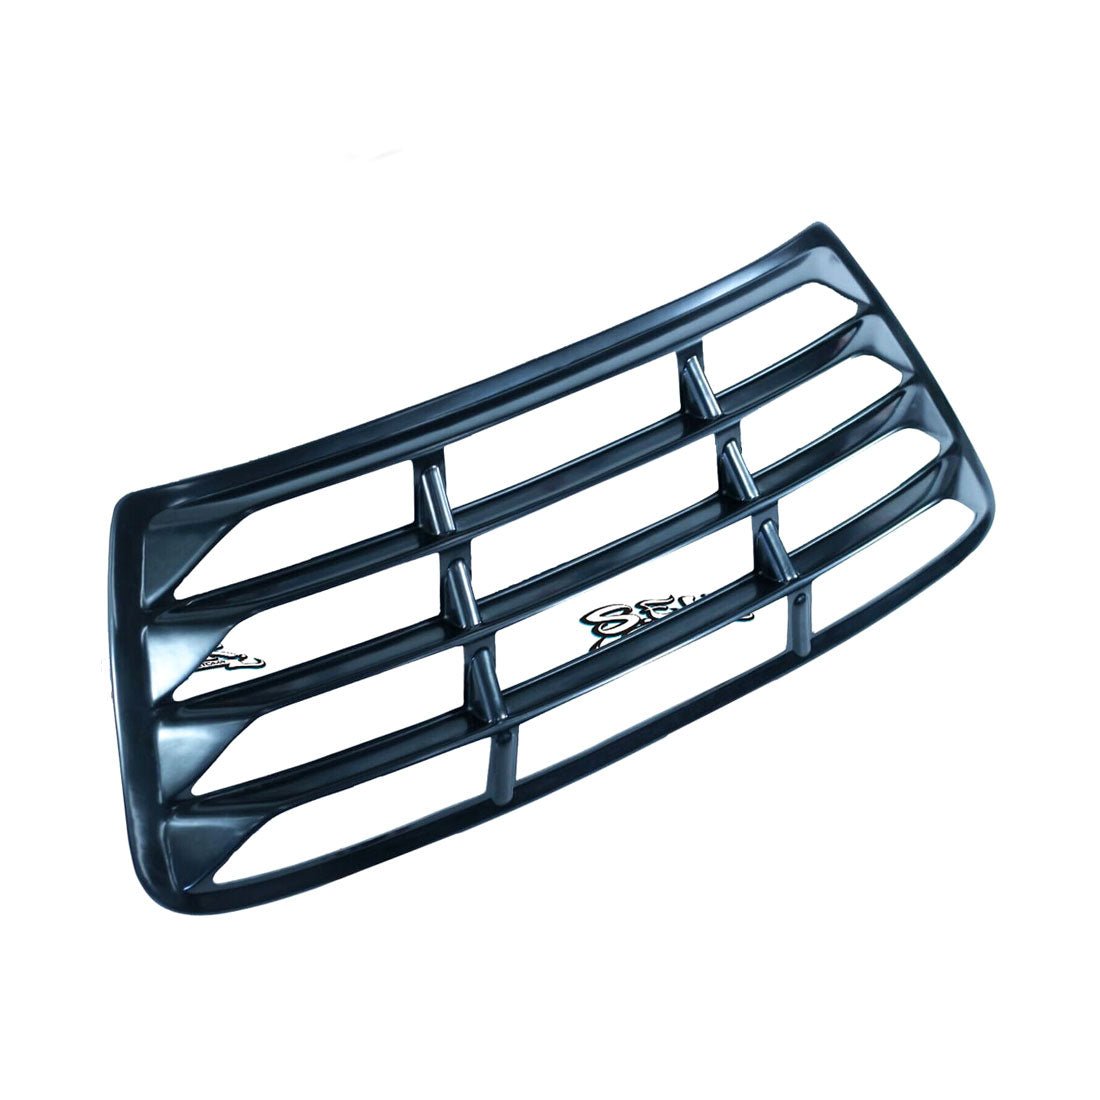 SEKCUSTOMS cat stairs Louver VW Golf 4 - PARTS33 GmbH